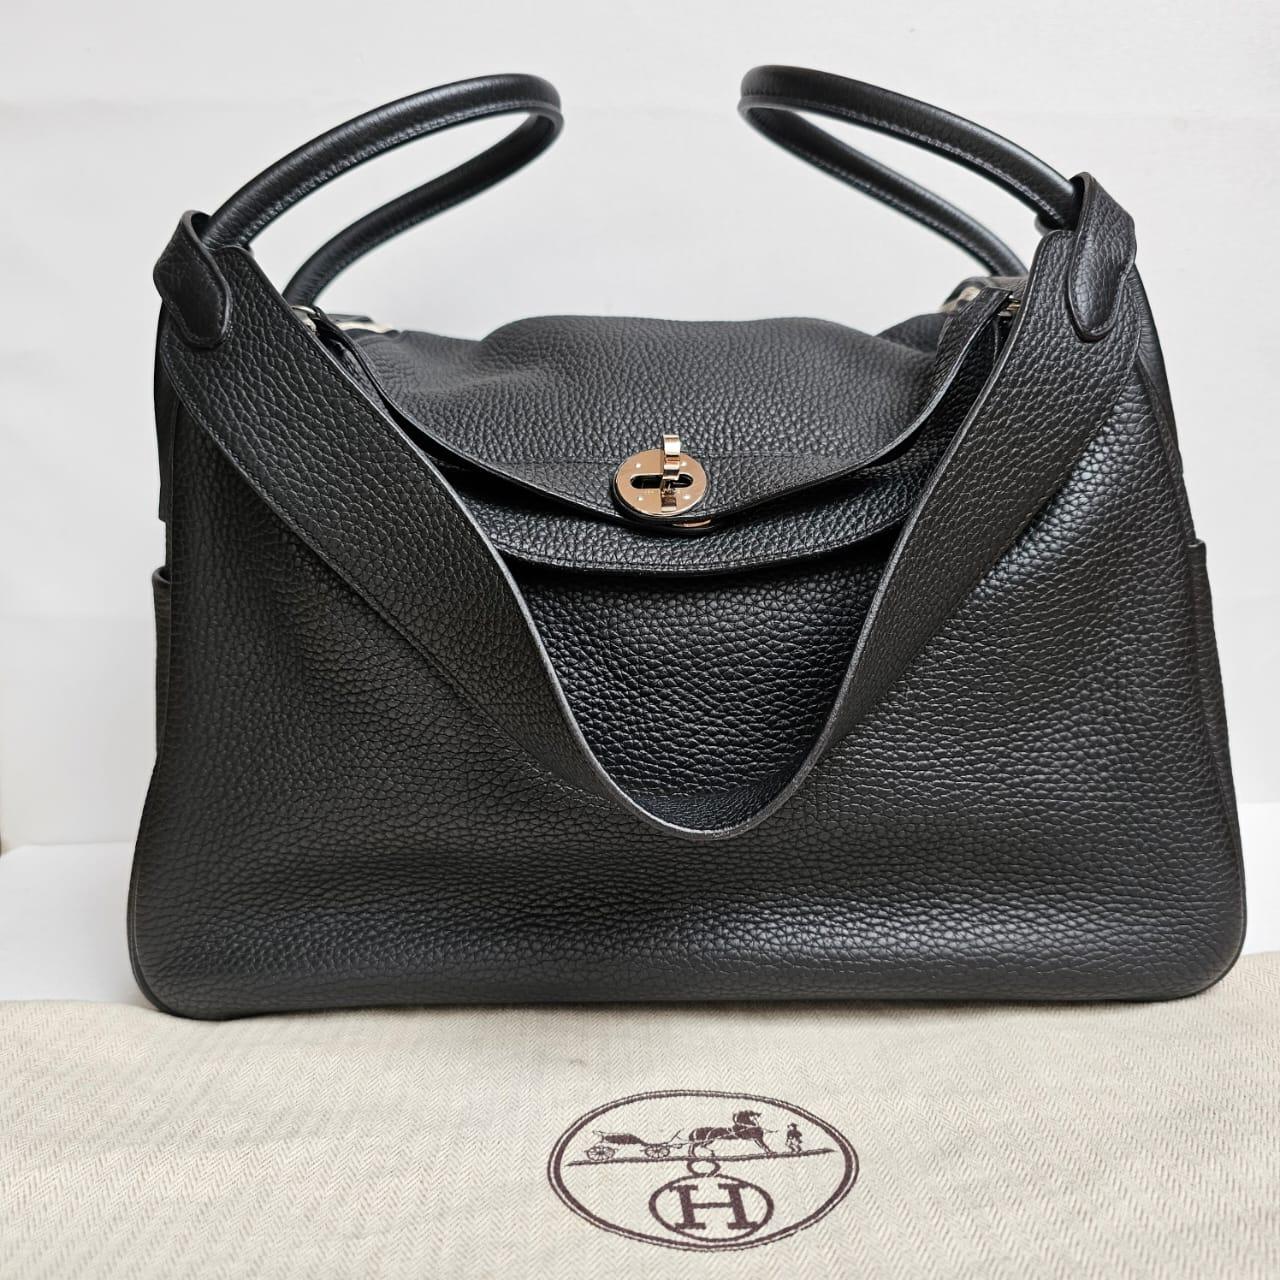 Classic lindy 34 in black Clemence leather with palladium hardware. Overall still in very good condition. Minor dents on the lining. Comes with its raincoat, japanese receipt and dust bag. Stamp square Q(2013).